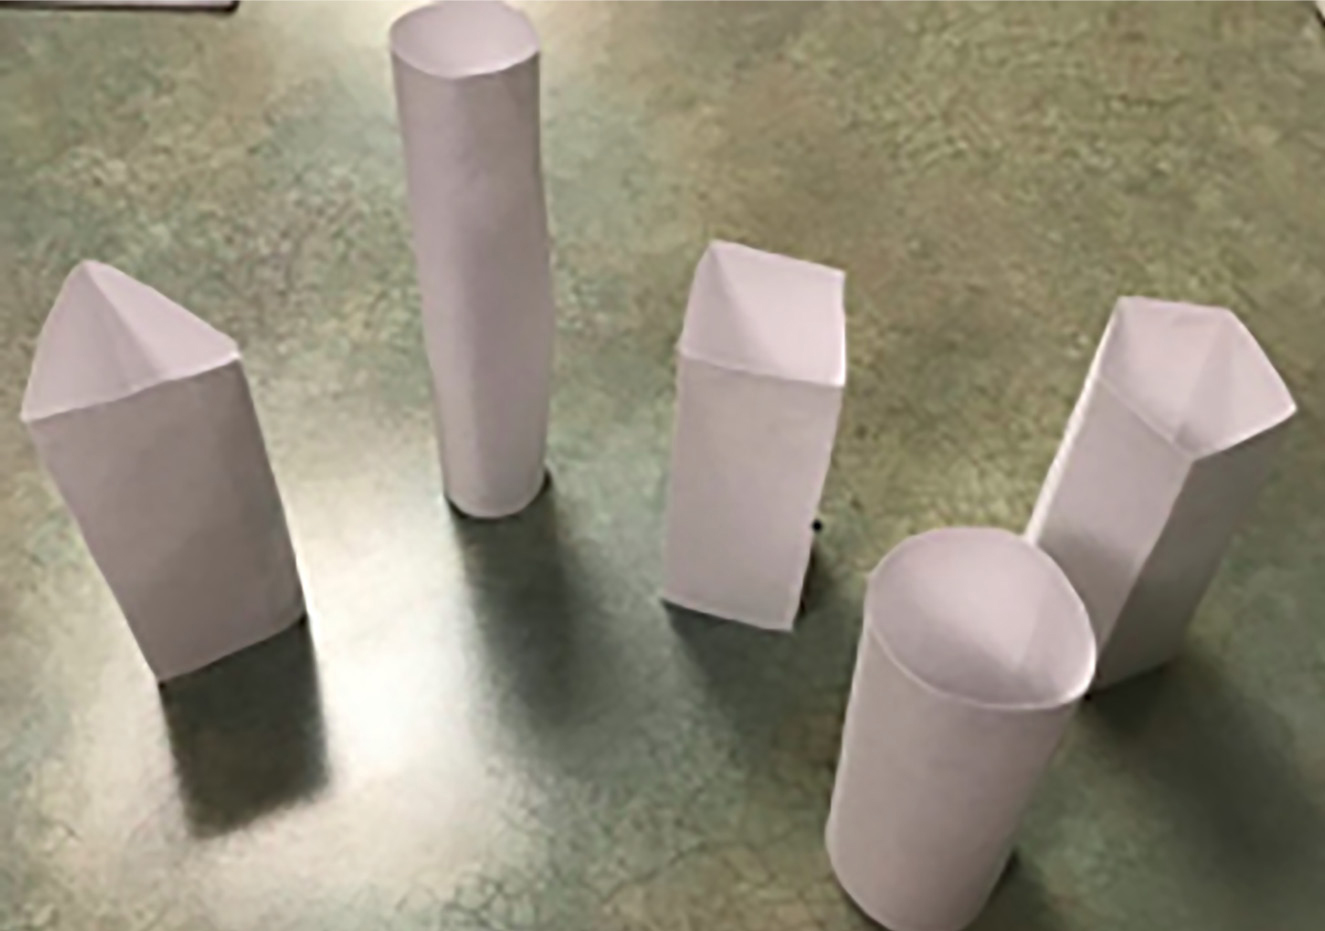 Sample of possible structures created with the Strength of Shapes activity.